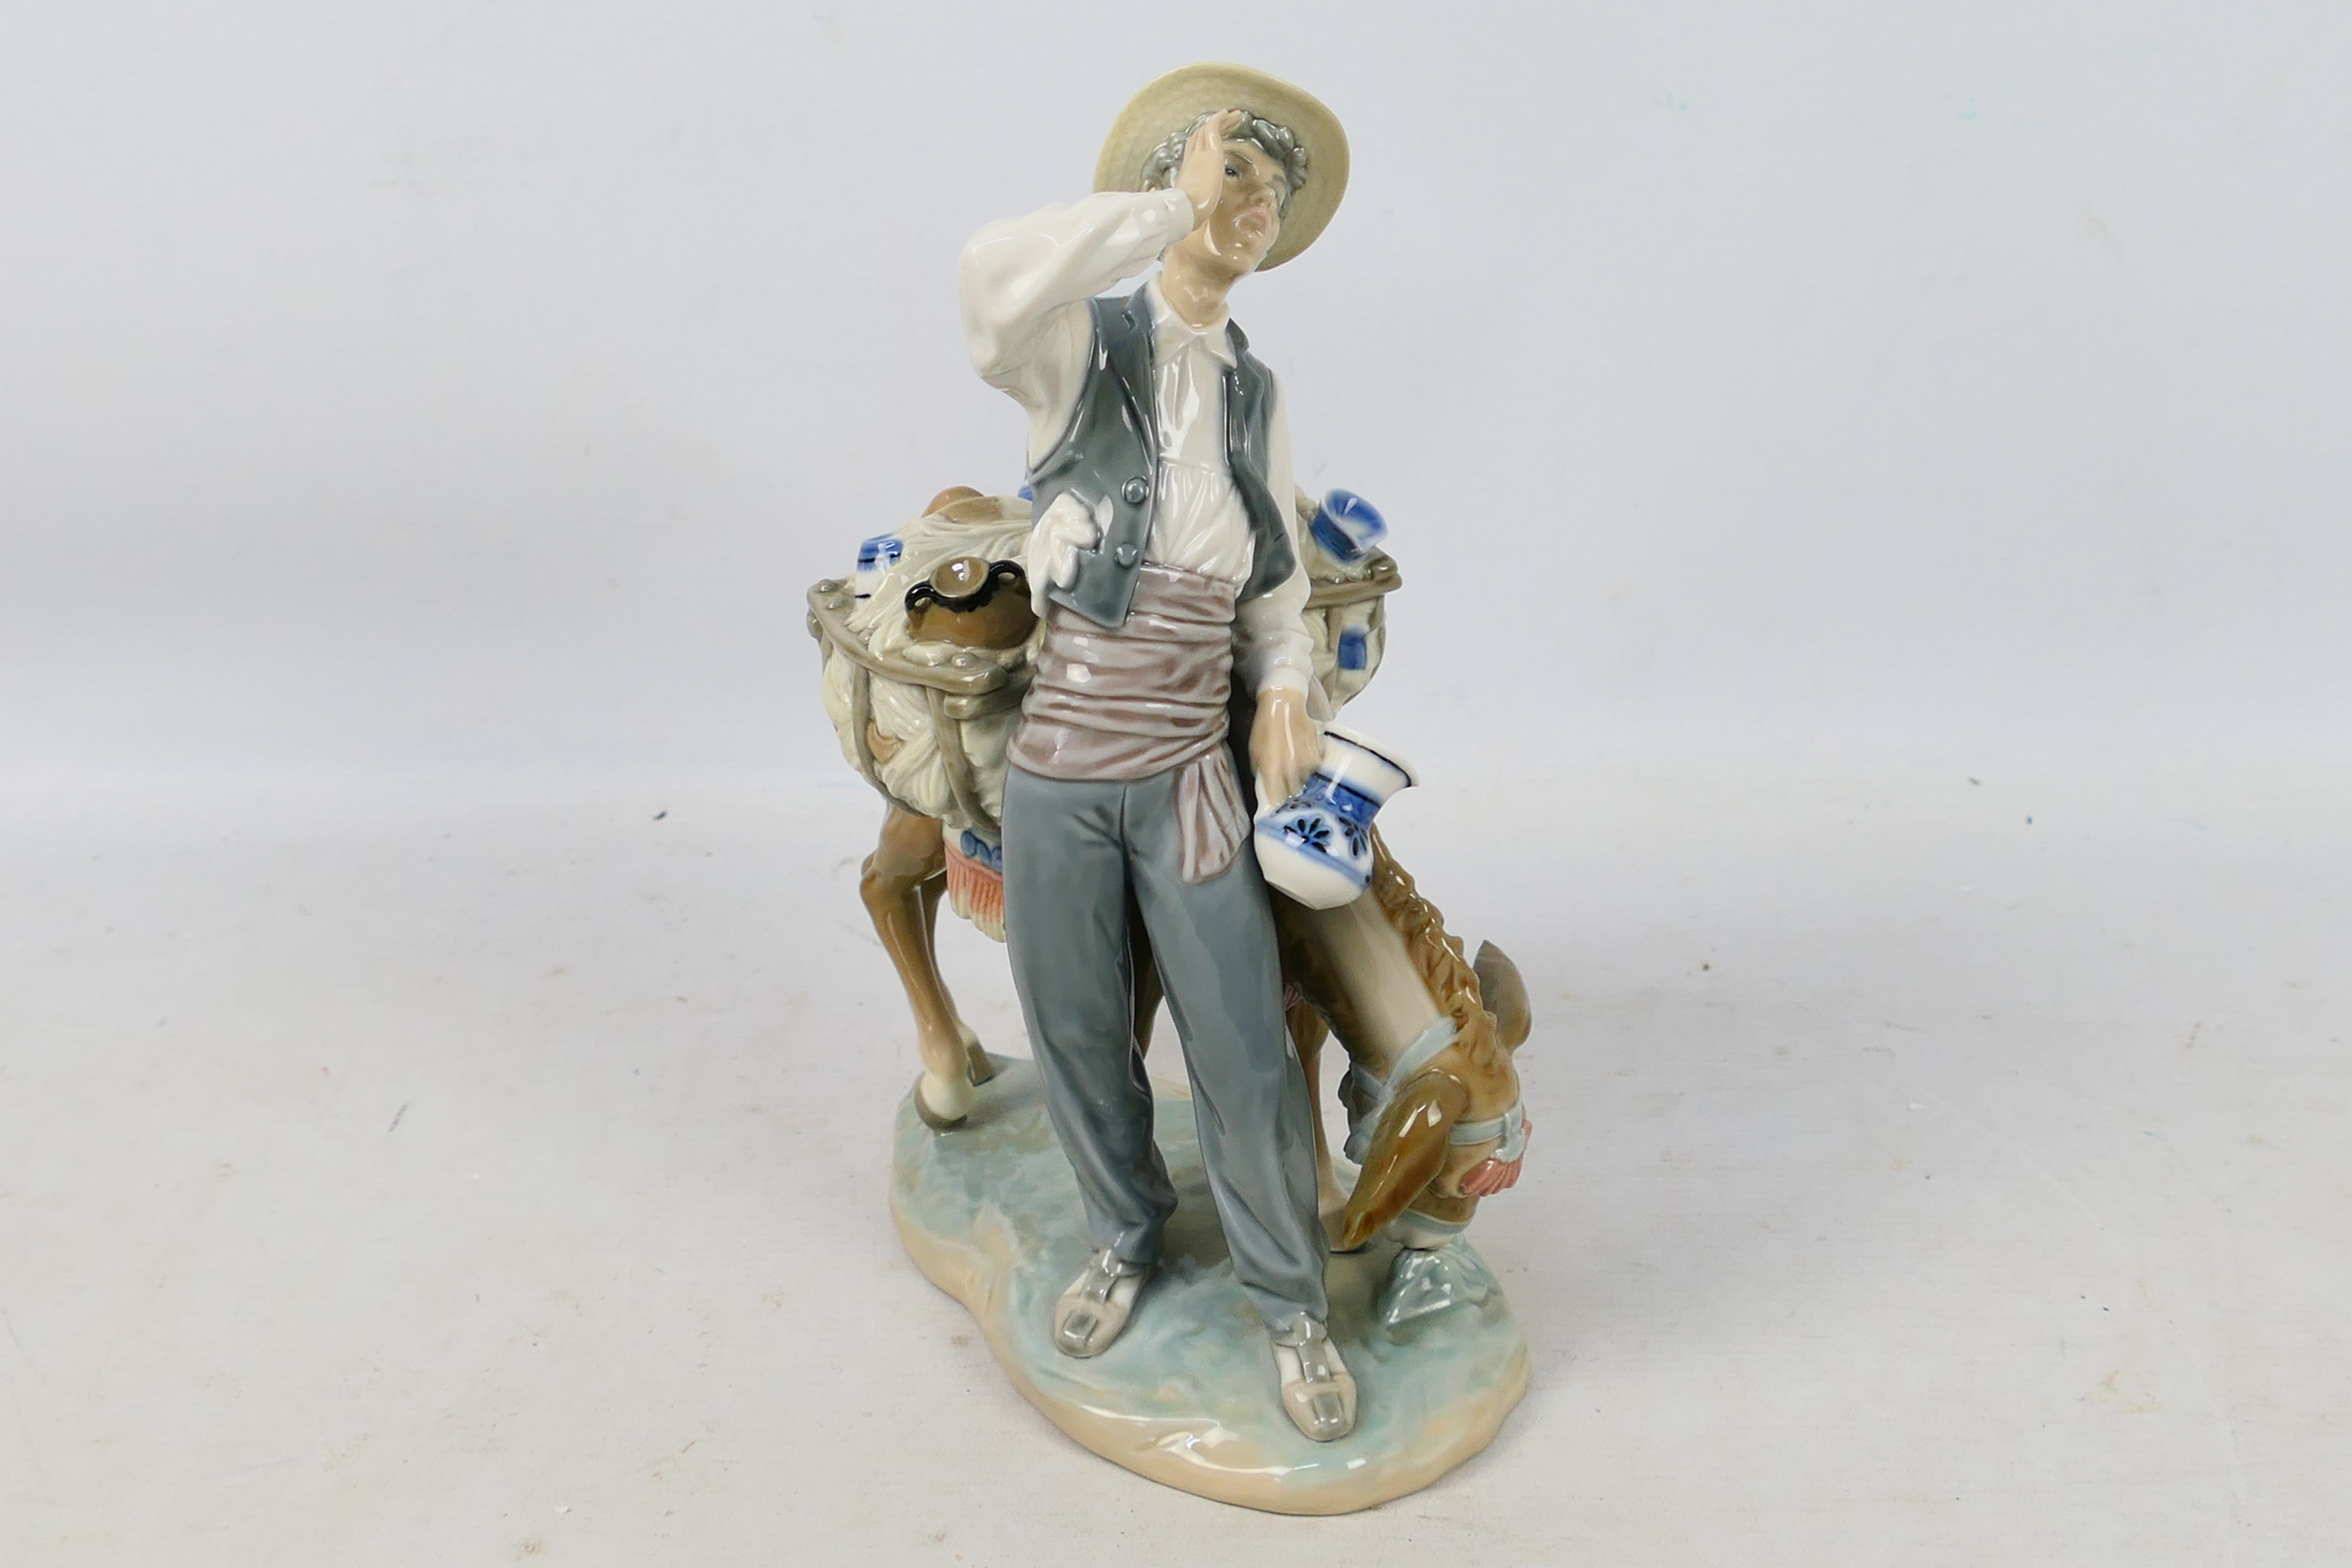 Lladro - A porcelain figural group entitled Peddler # 4859 depicting a pottery seller with his